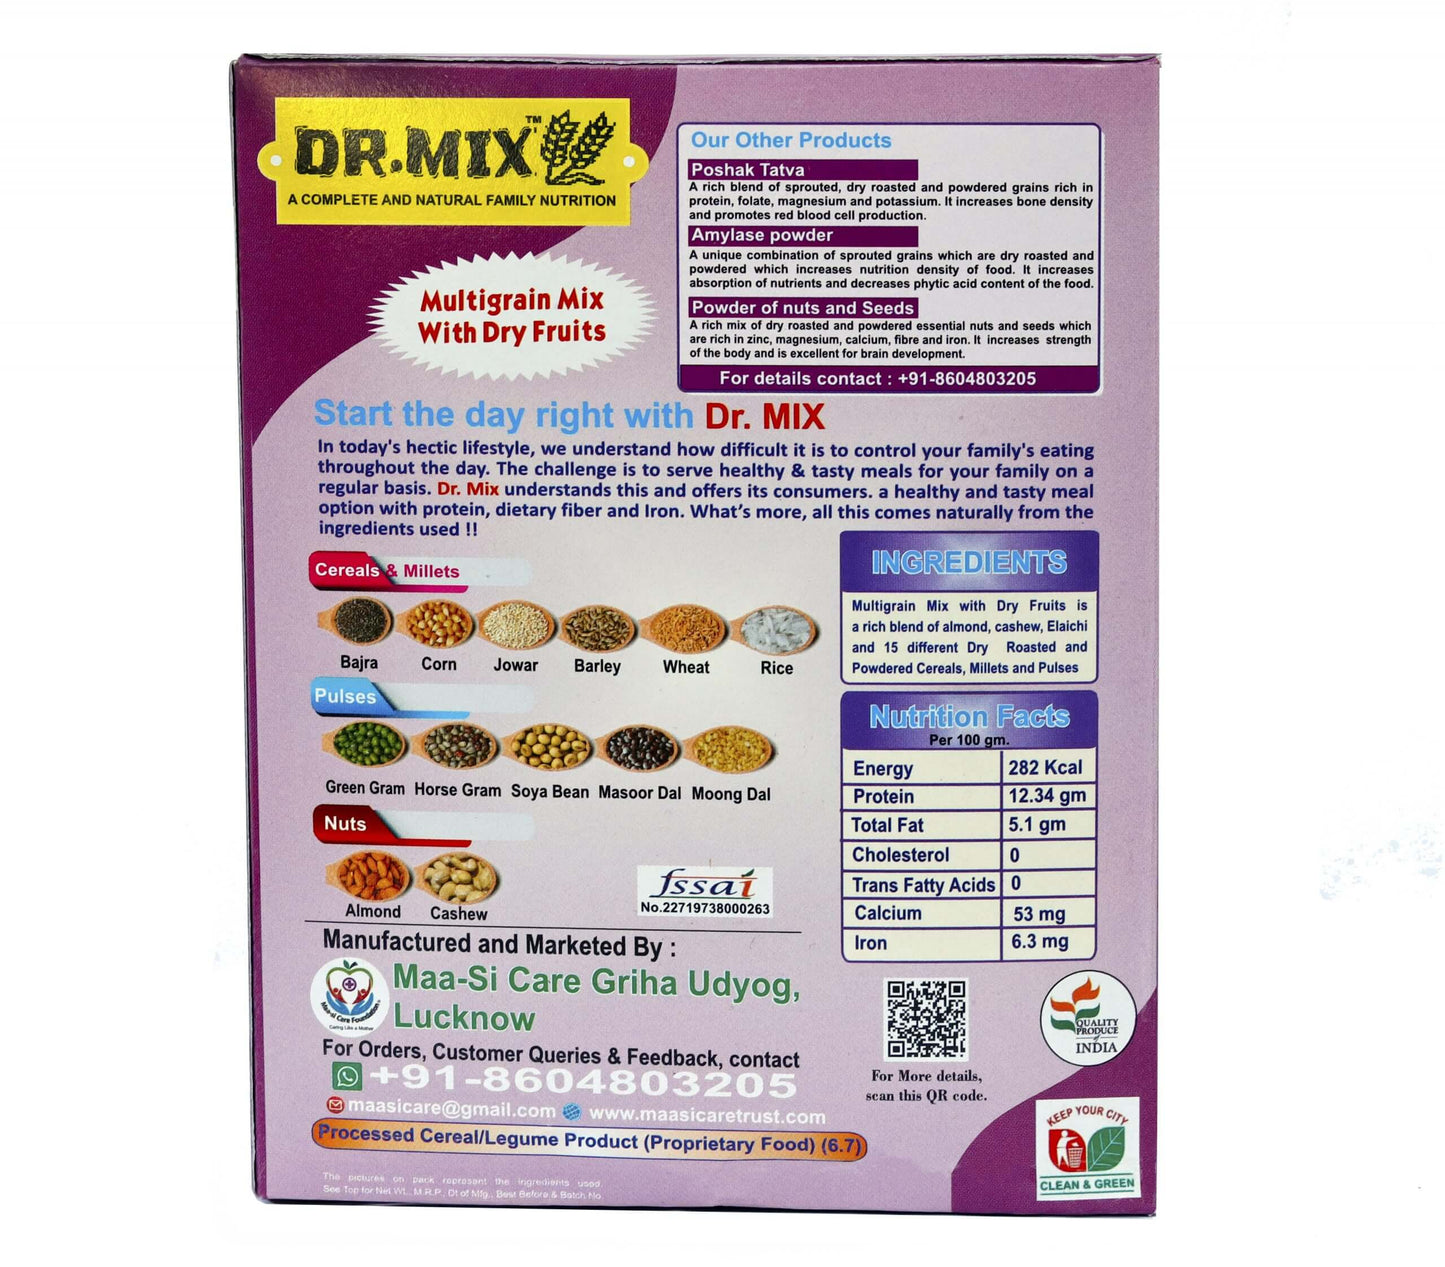 Dr. Mix Multigrain Mix with Dry Fruits